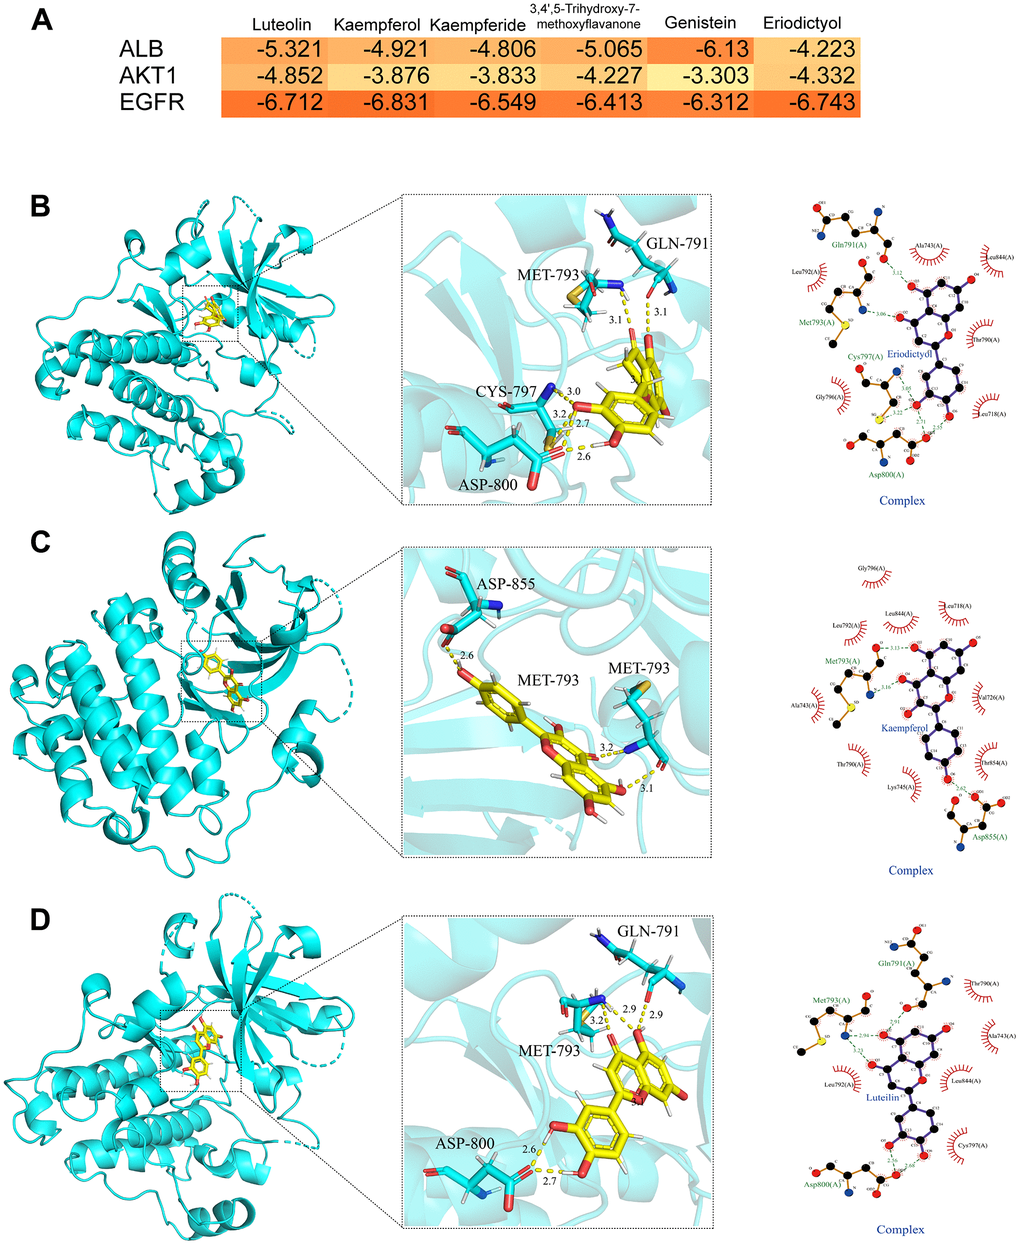 Molecular docking analysis. (A) The heat map of molecular docking scores (kcal/mol). (B) The binding modes of eriodictyol-EGFR complex (2D and 3D images). (C) The binding modes of kaempferol-EGFR complex (2D and 3D images). (D) The binding modes of luteolin-EGFR complex (2D and 3D images). Results of 3 independent experiments were described above.